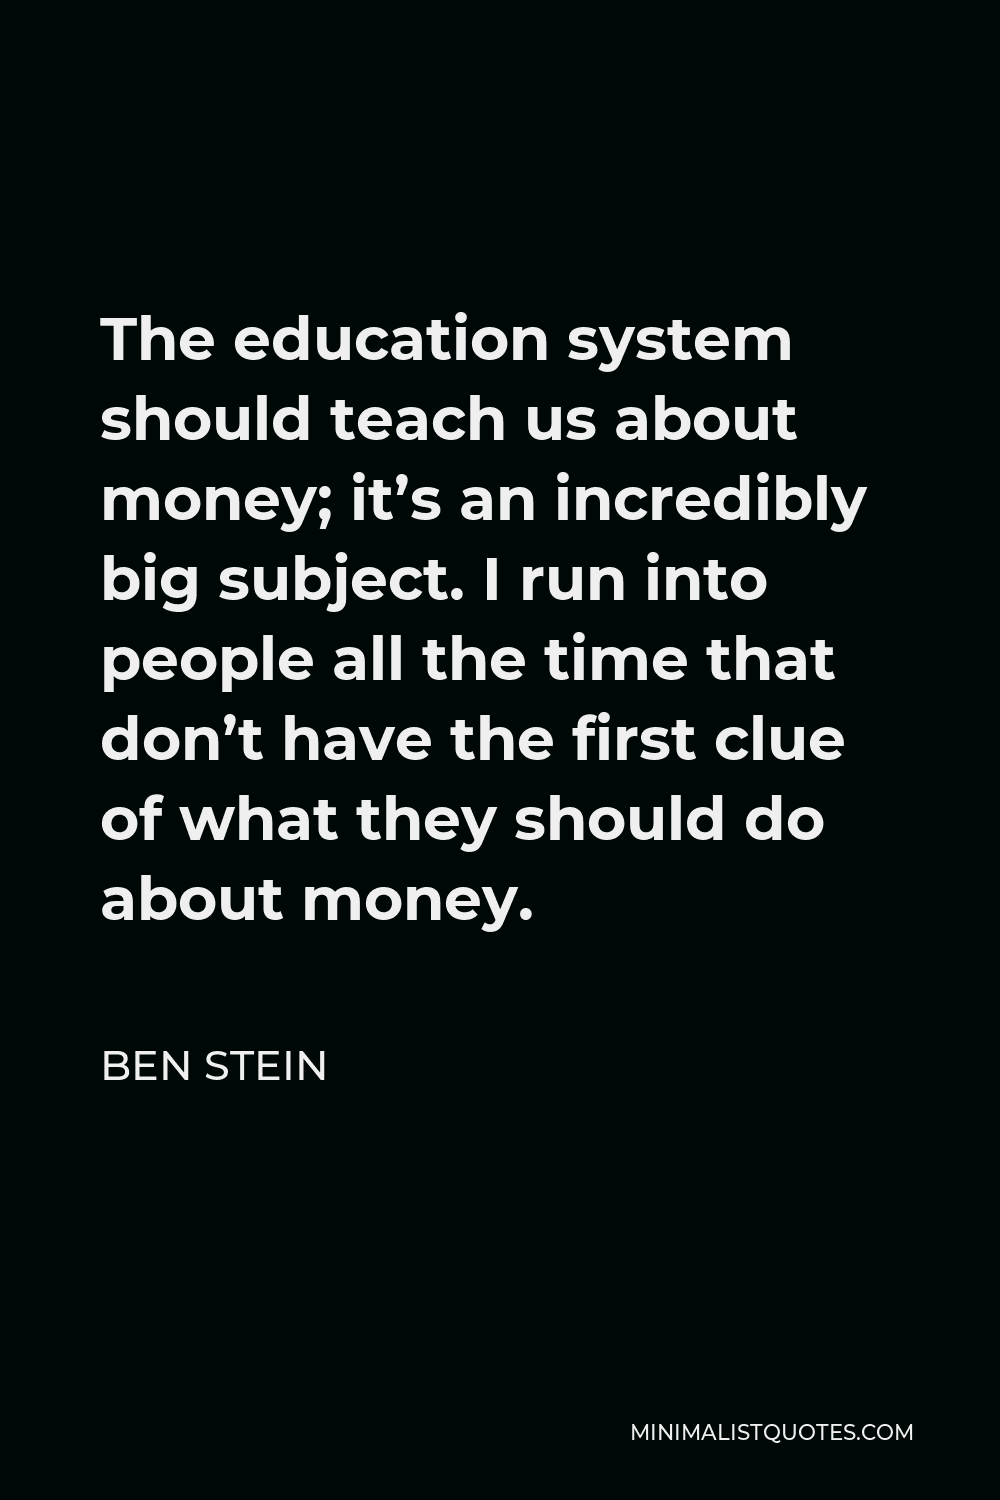 Ben Stein Quote - The education system should teach us about money; it’s an incredibly big subject. I run into people all the time that don’t have the first clue of what they should do about money.